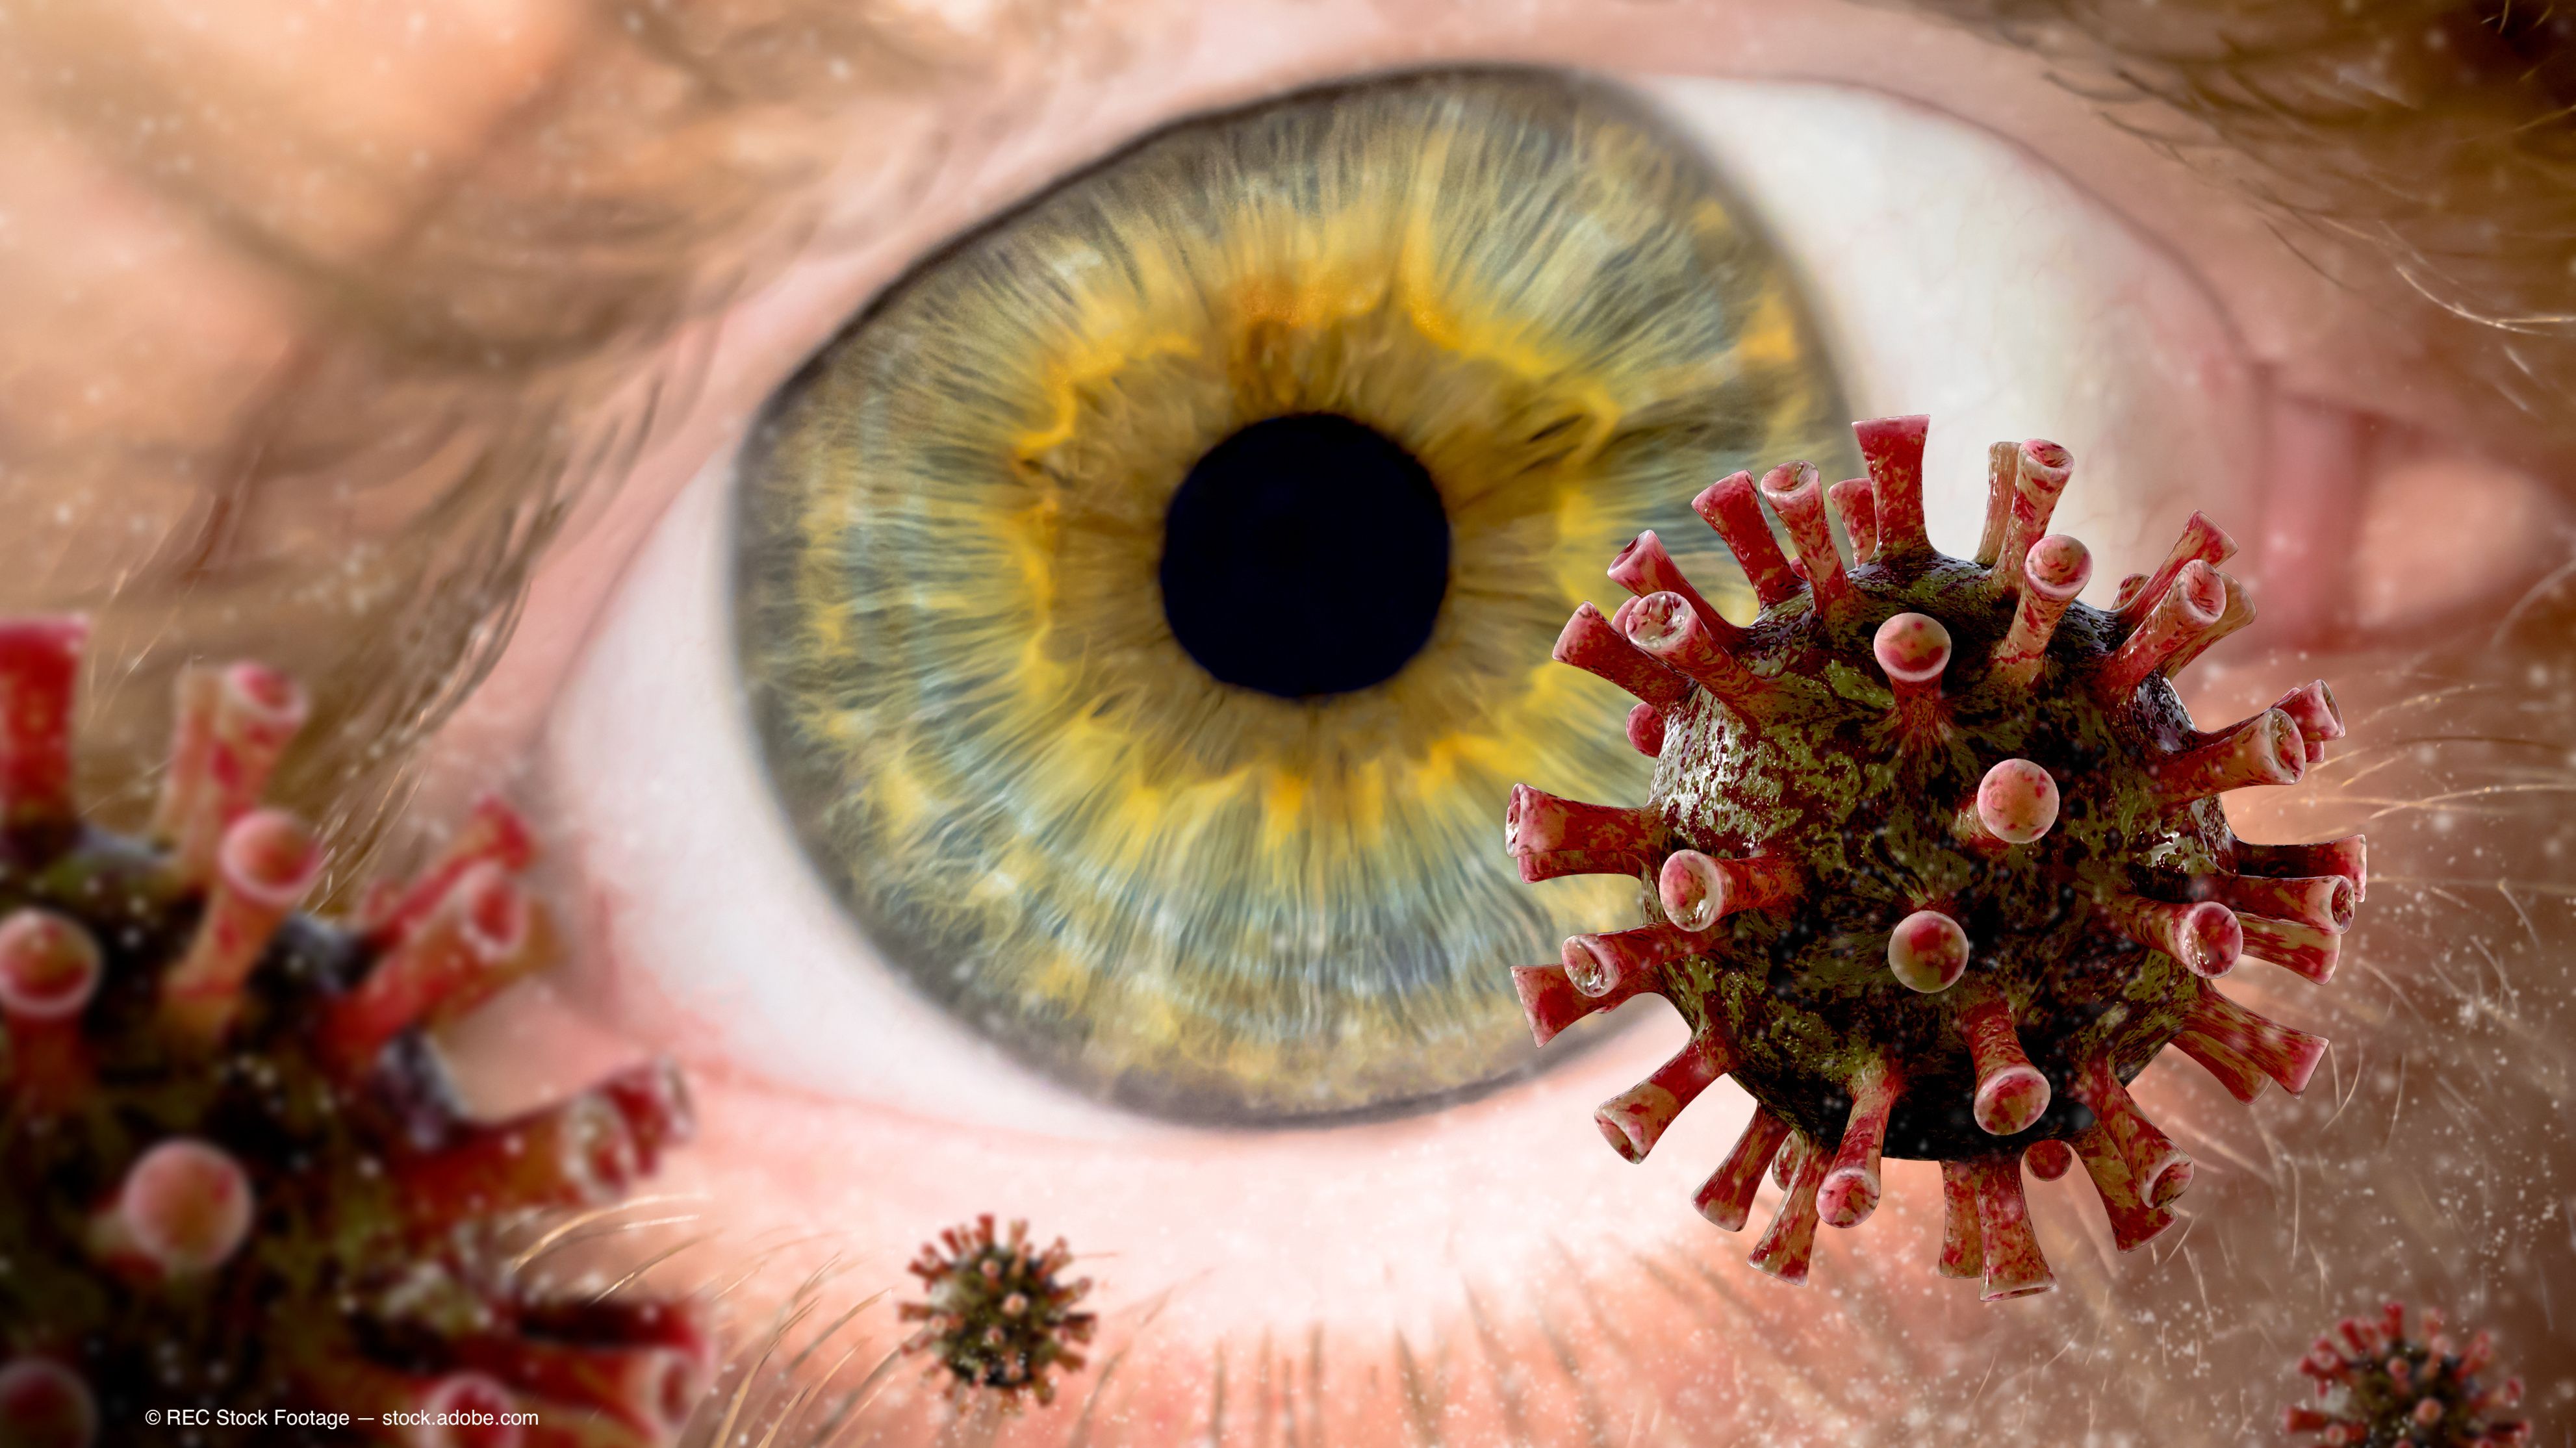  Investigators analyzing the impact of the COVID-19 pandemic on outcomes of infectious keratitis reported that irreversible blindness was prevalent in a substantial number of patients.